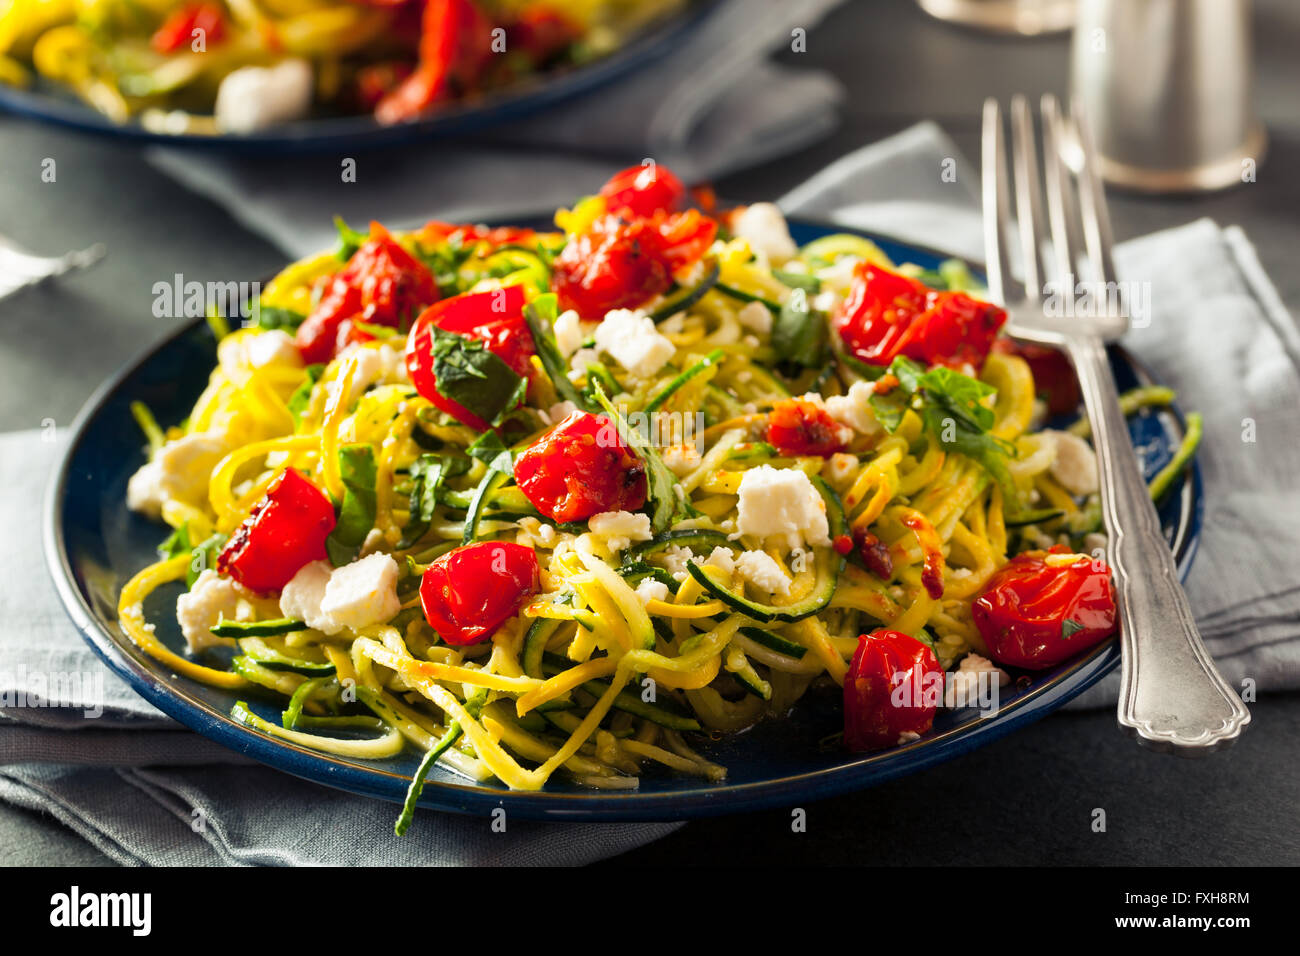 Turning the Handle of a Vegetable Spiralizer, Slicer To Make Homemade Zucchini  Noodles Stock Photo - Image of meal, food: 212127480